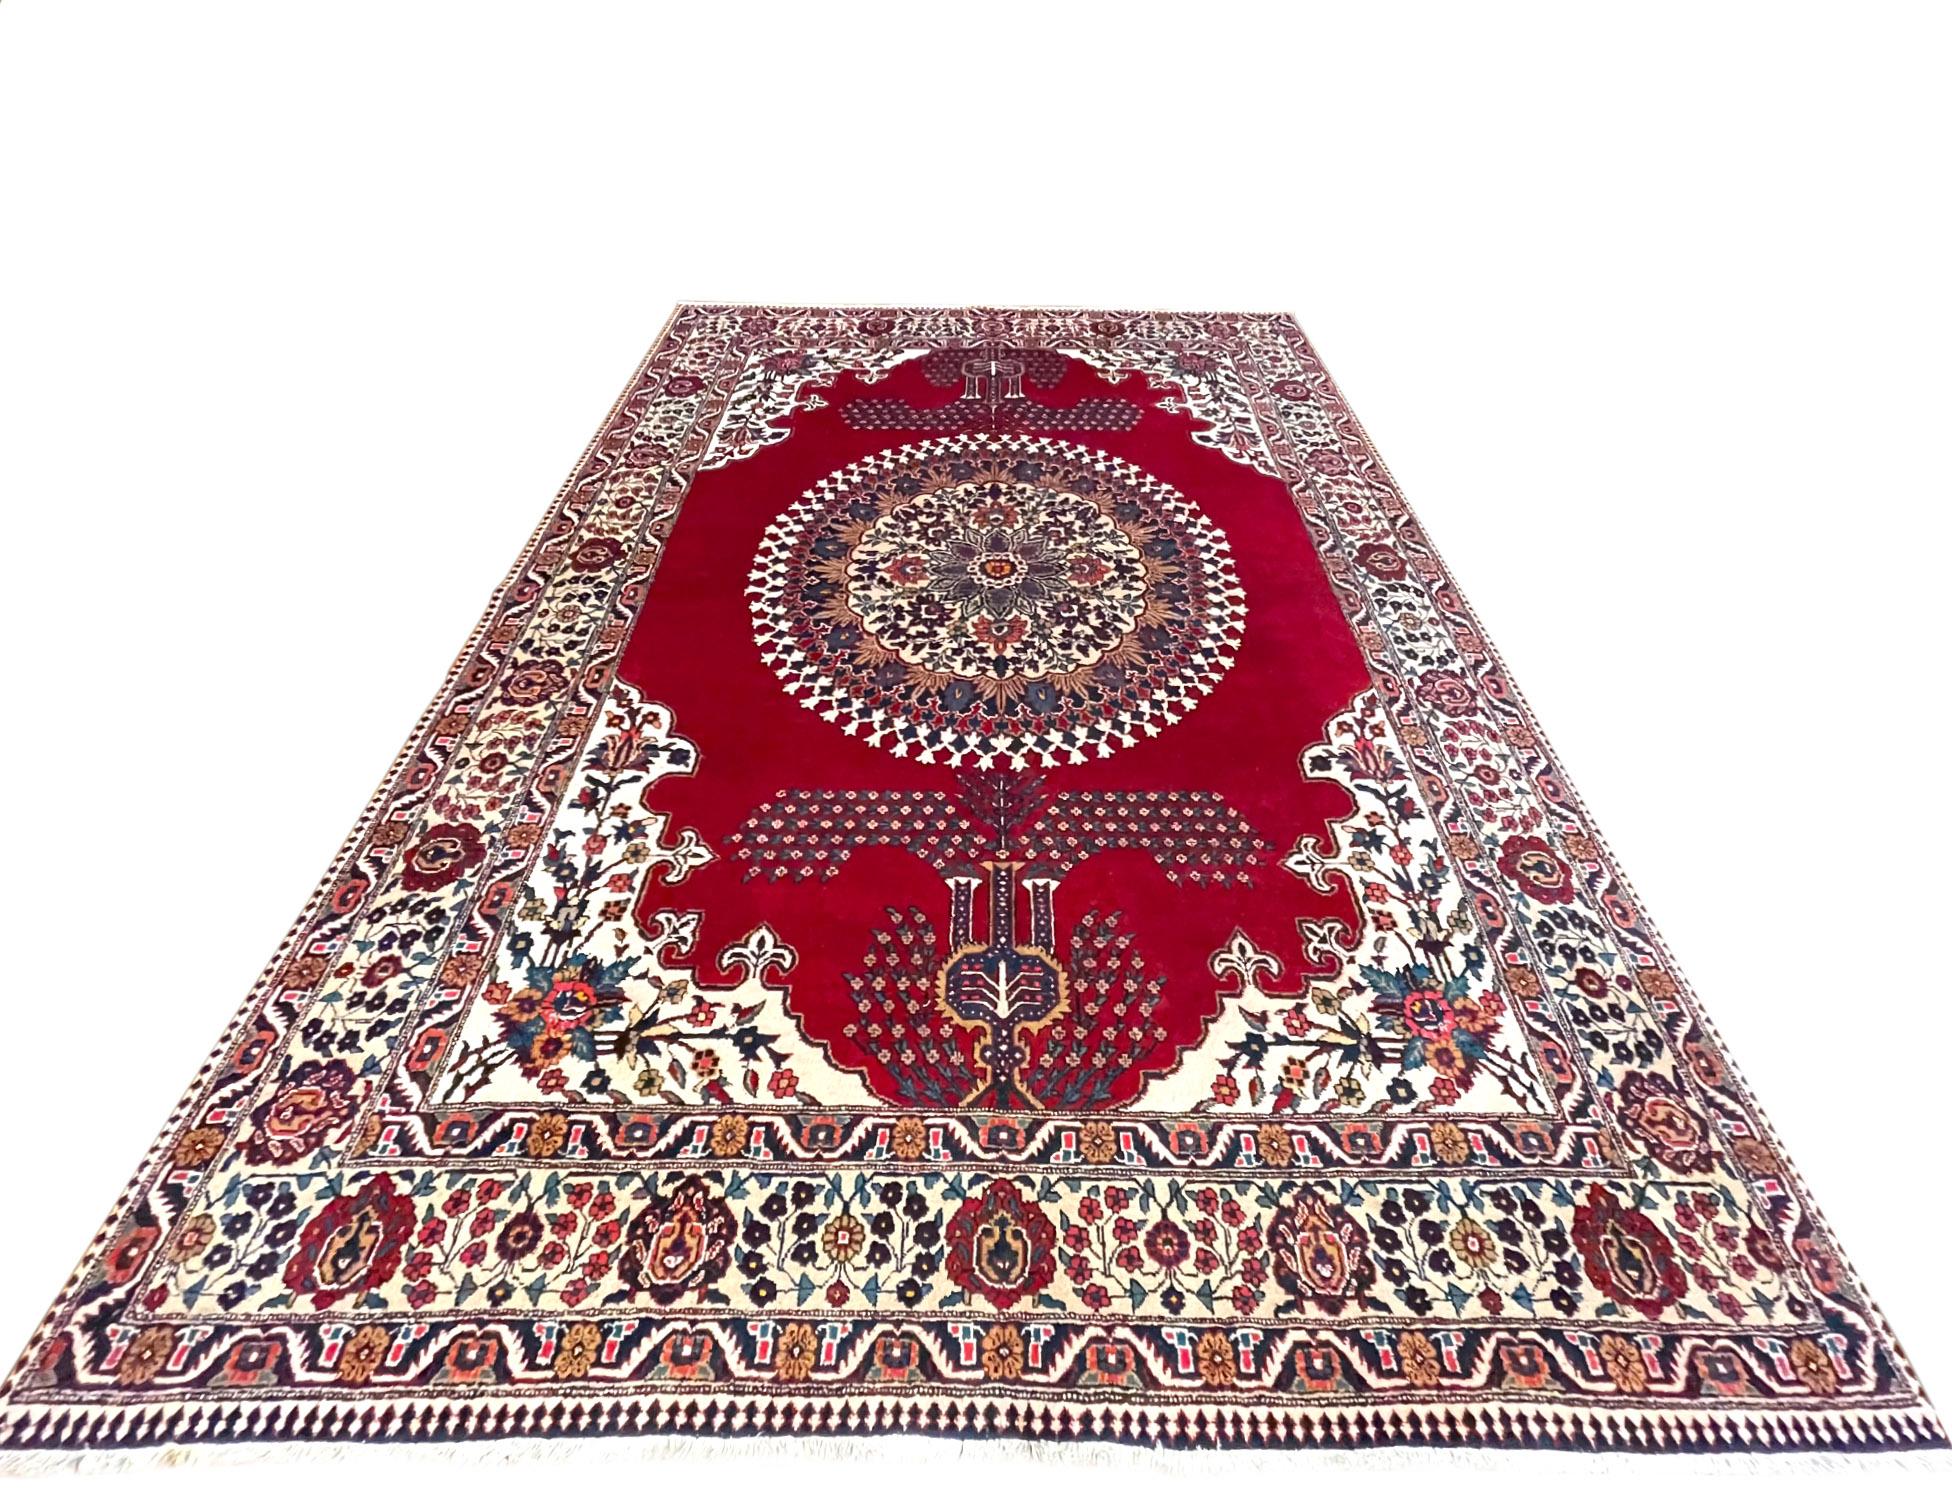 This Persian Tabriz-Heriz rug, Heriz rugs are Persian rugs from the area of Heriz, East Azerbaijan in northwest Iran, northeast of Tabriz. This rug has wool pile and cotton foundation. This rug has semi-floral with a unique medallion design which